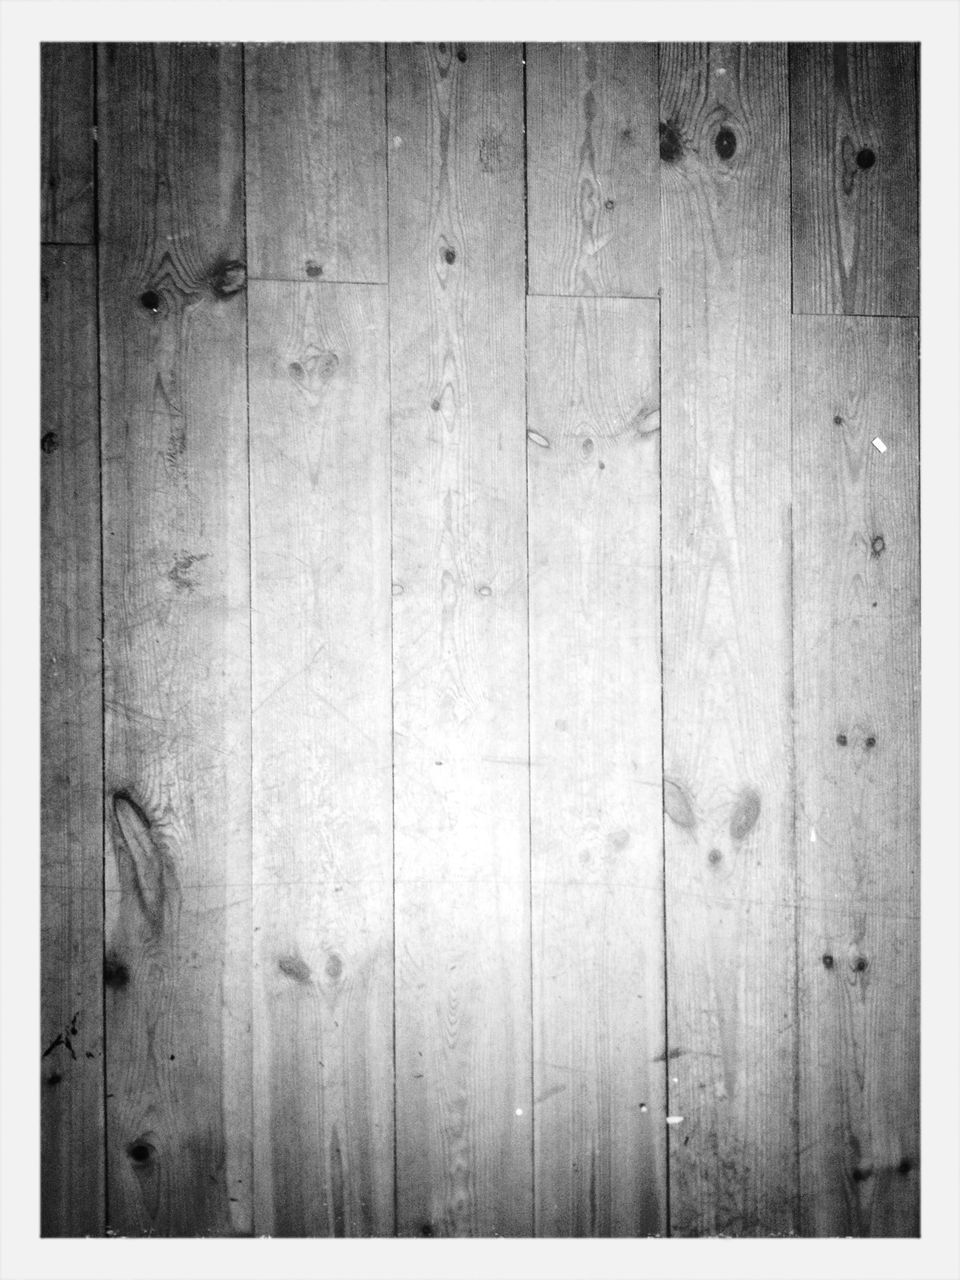 wood - material, transfer print, wooden, full frame, wood, auto post production filter, backgrounds, plank, textured, door, pattern, close-up, brown, no people, day, indoors, built structure, old, wall - building feature